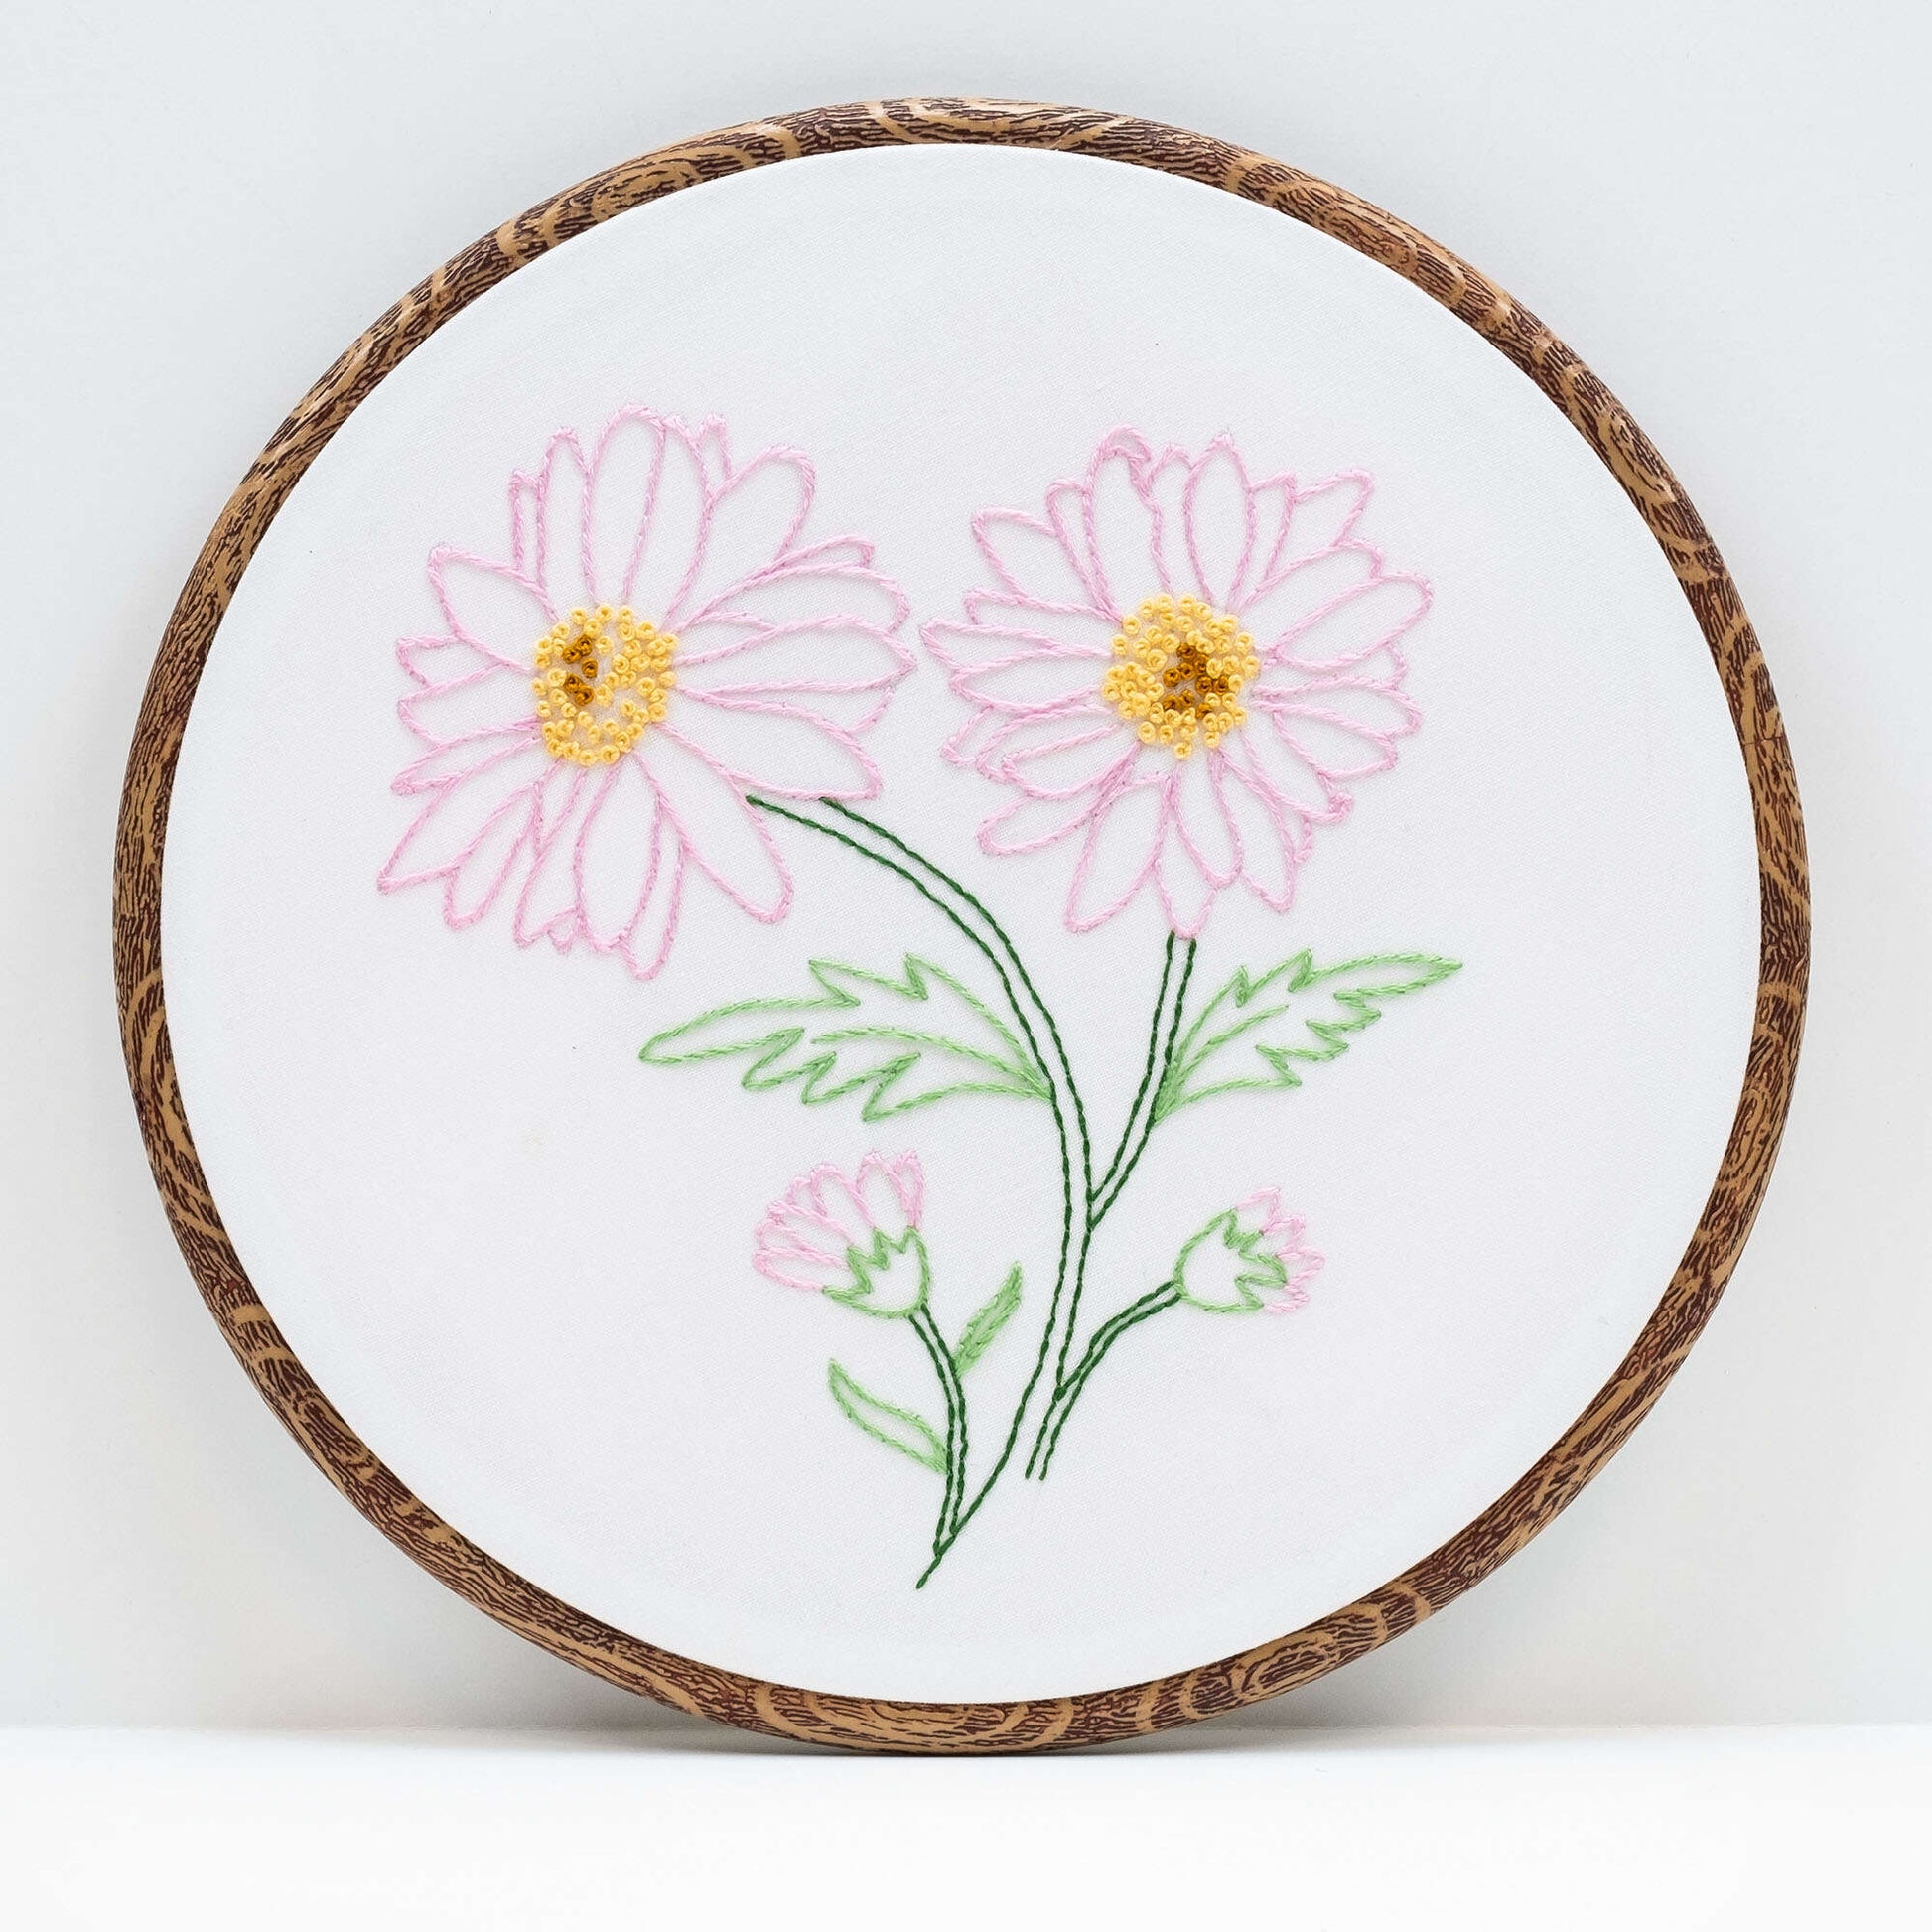 Free Anchor Flower Sketch Embroidery Design Pattern